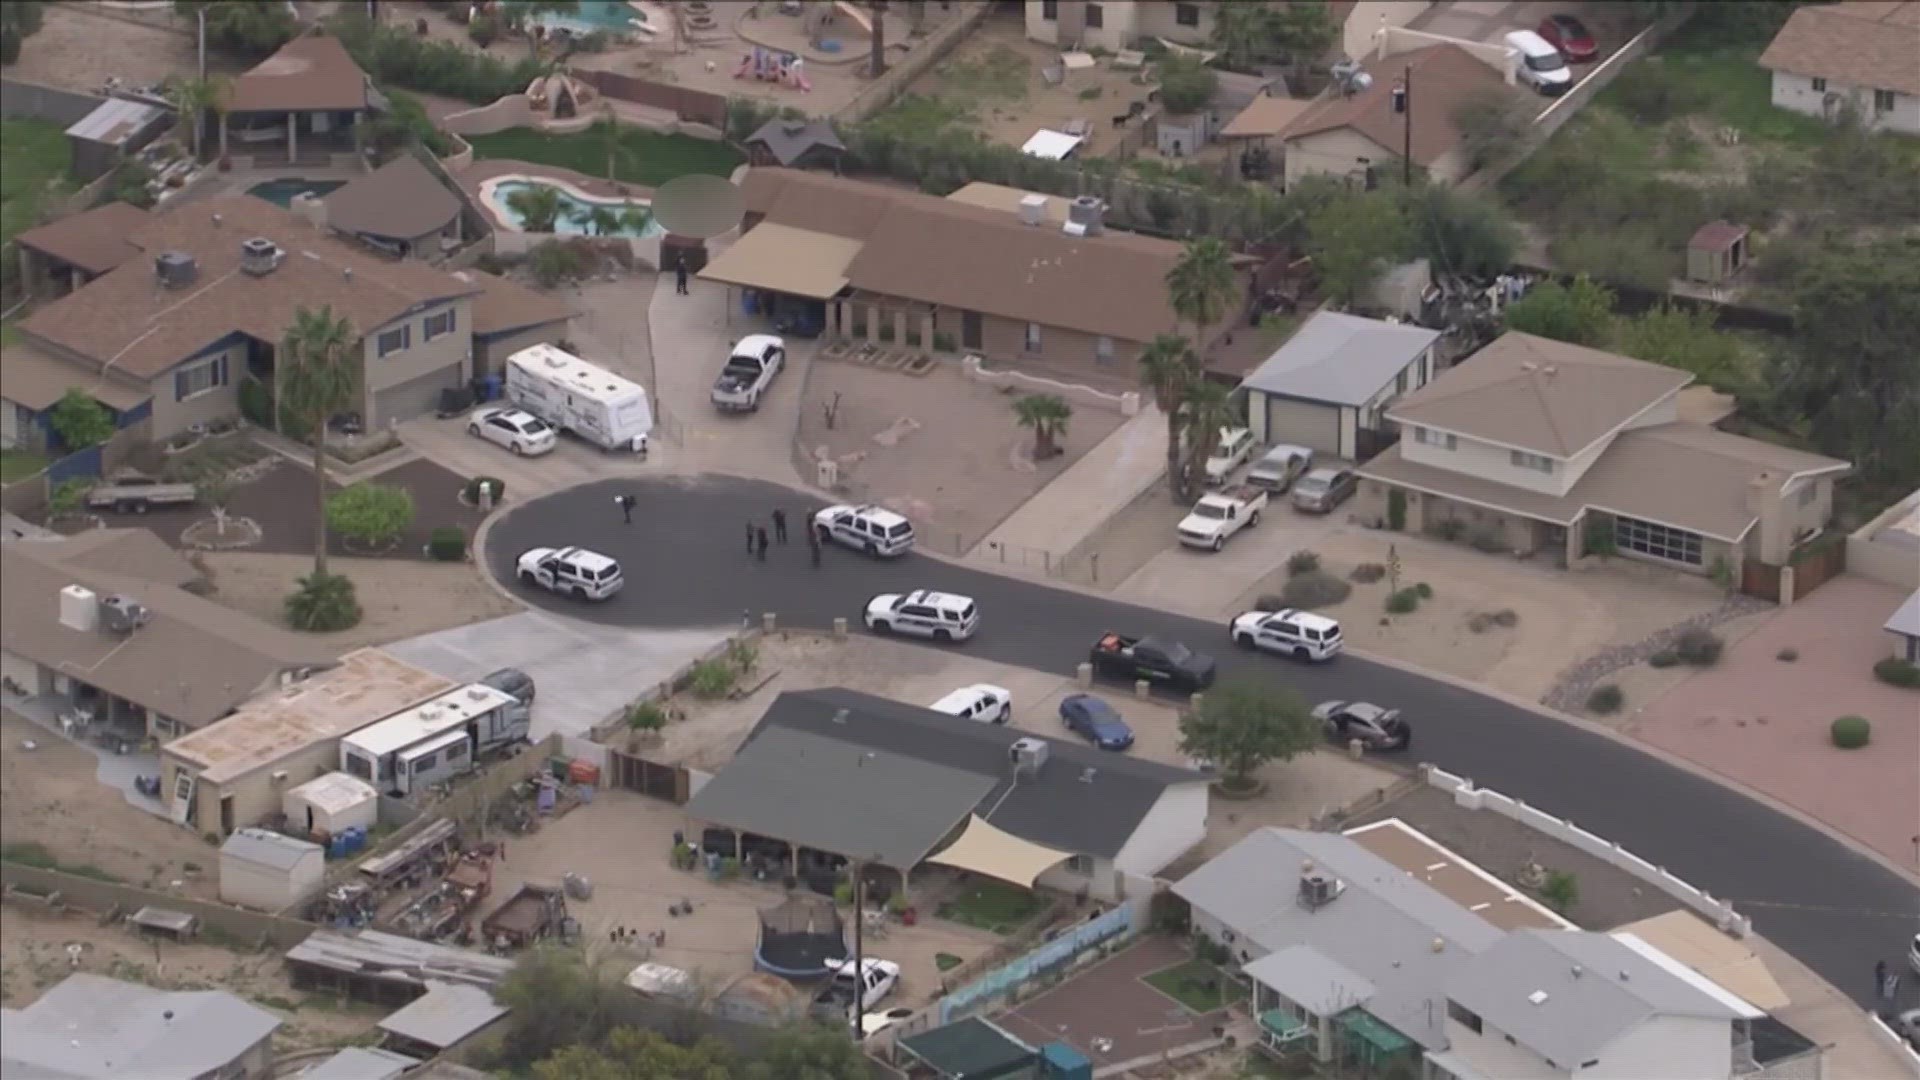 Phoenix police are conducting a death investigation at a home near 16th Street and South Mountain Avenue.